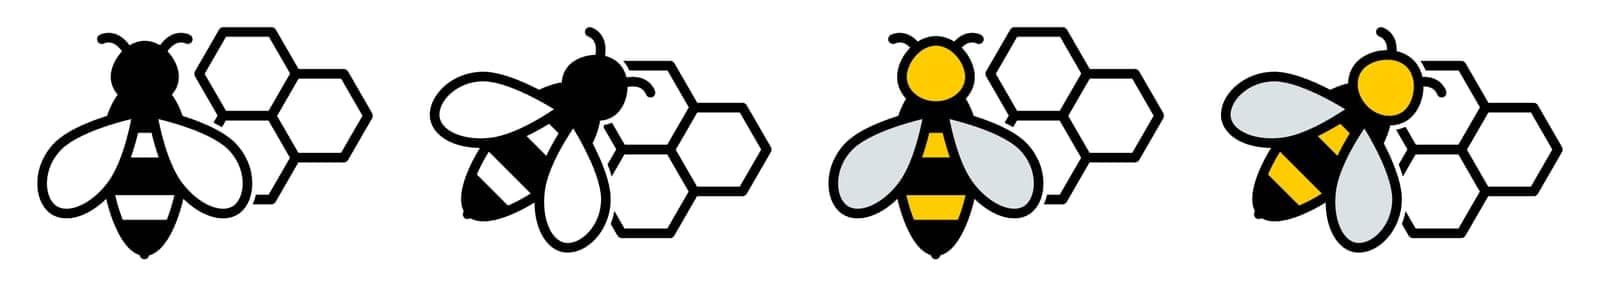 Simple bee and honeycomb icon. Black and white / coloured version by Ivanko